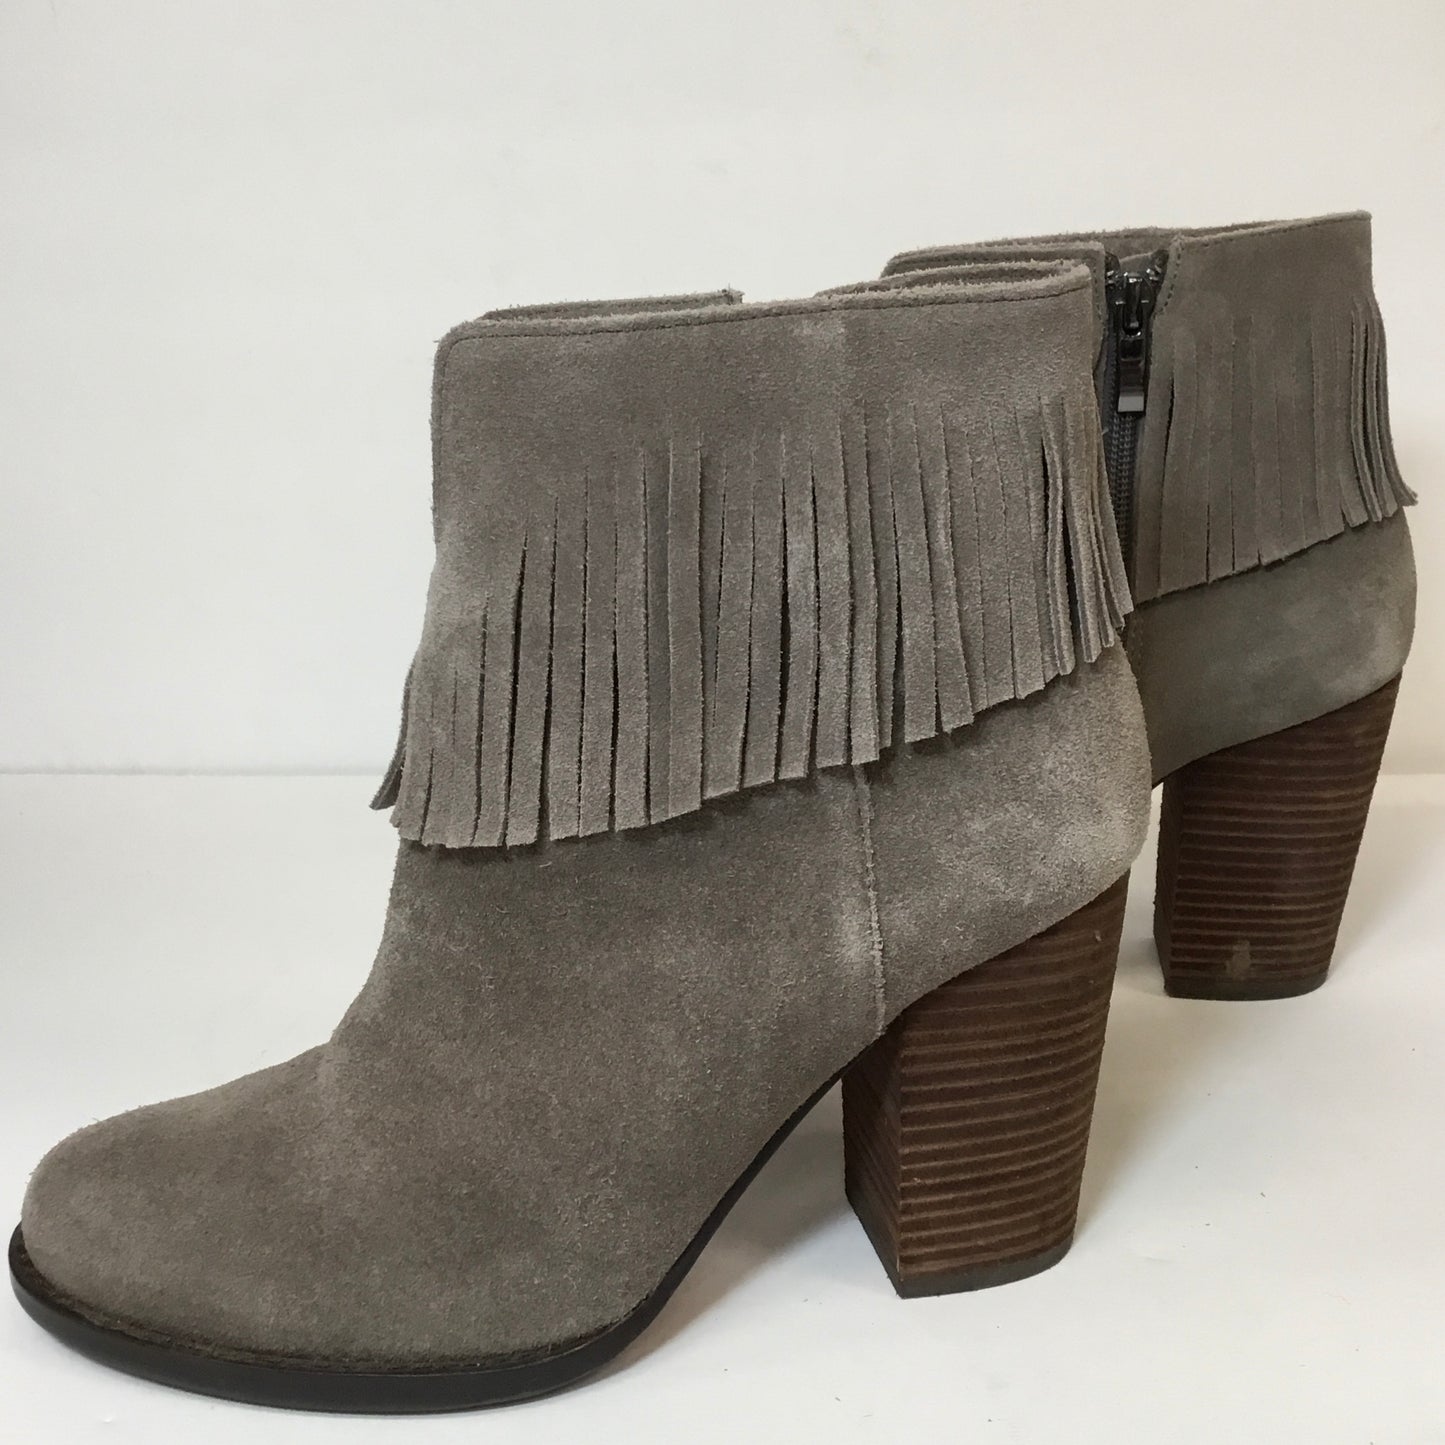 Boots Ankle Heels By Neiman Marcus  Size: 8.5